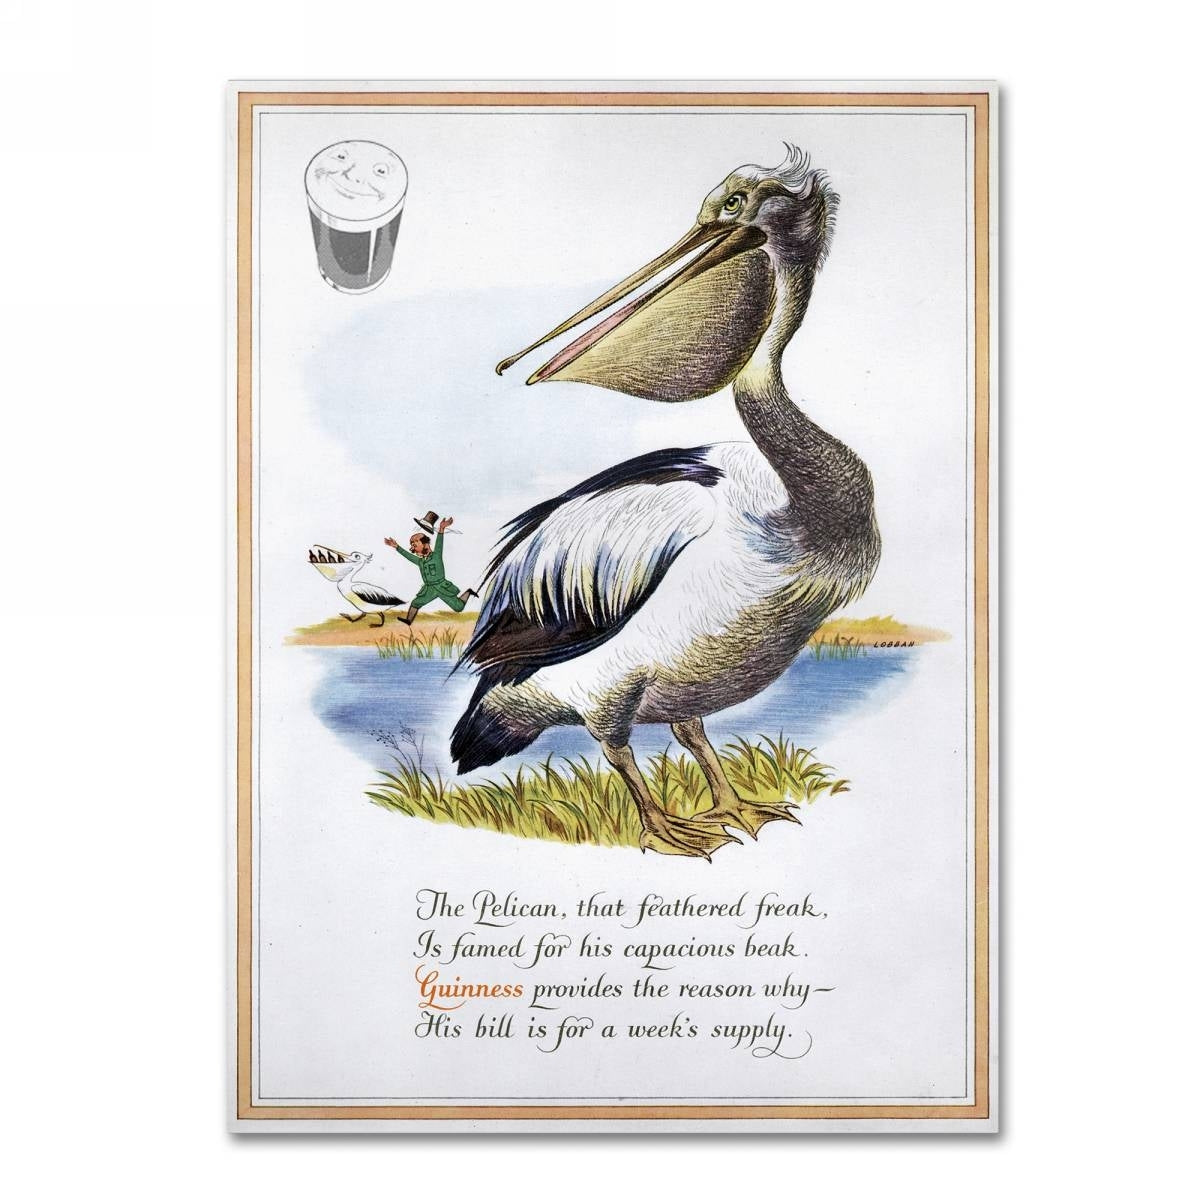 A Guinness Brewery 'Guinness Pelican' Canvas Art featuring a pelican enjoyably sipping on a glass of beer.